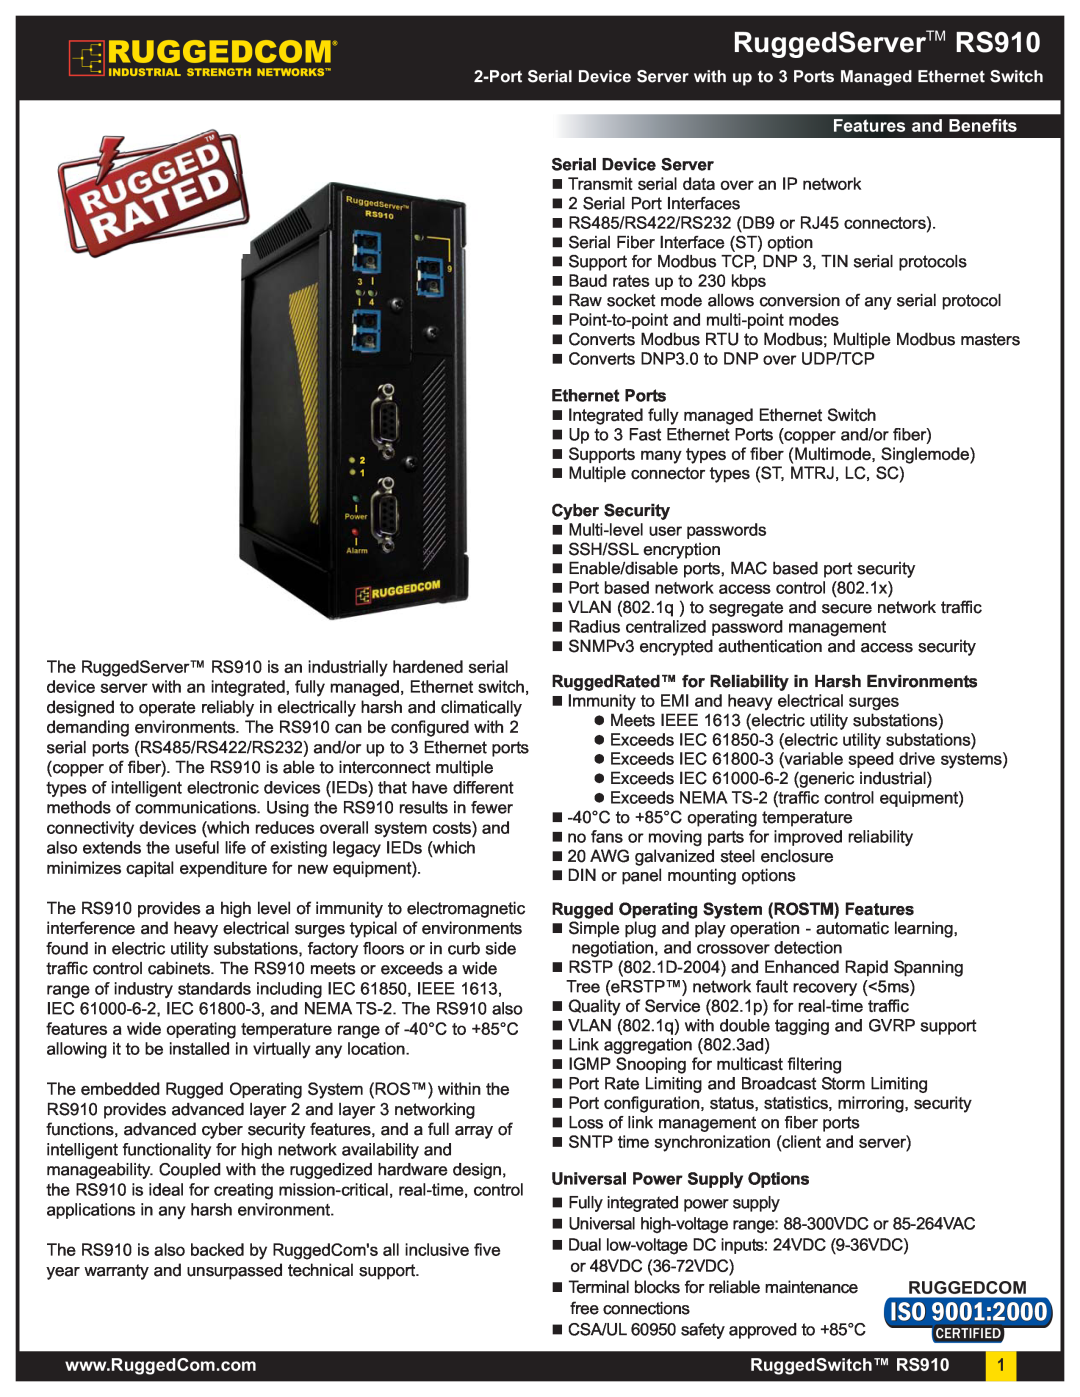 RuggedCom warranty RuggedServerTM RS910, Features and Benefits, Serial Device Server, Ethernet Ports, Cyber Security 